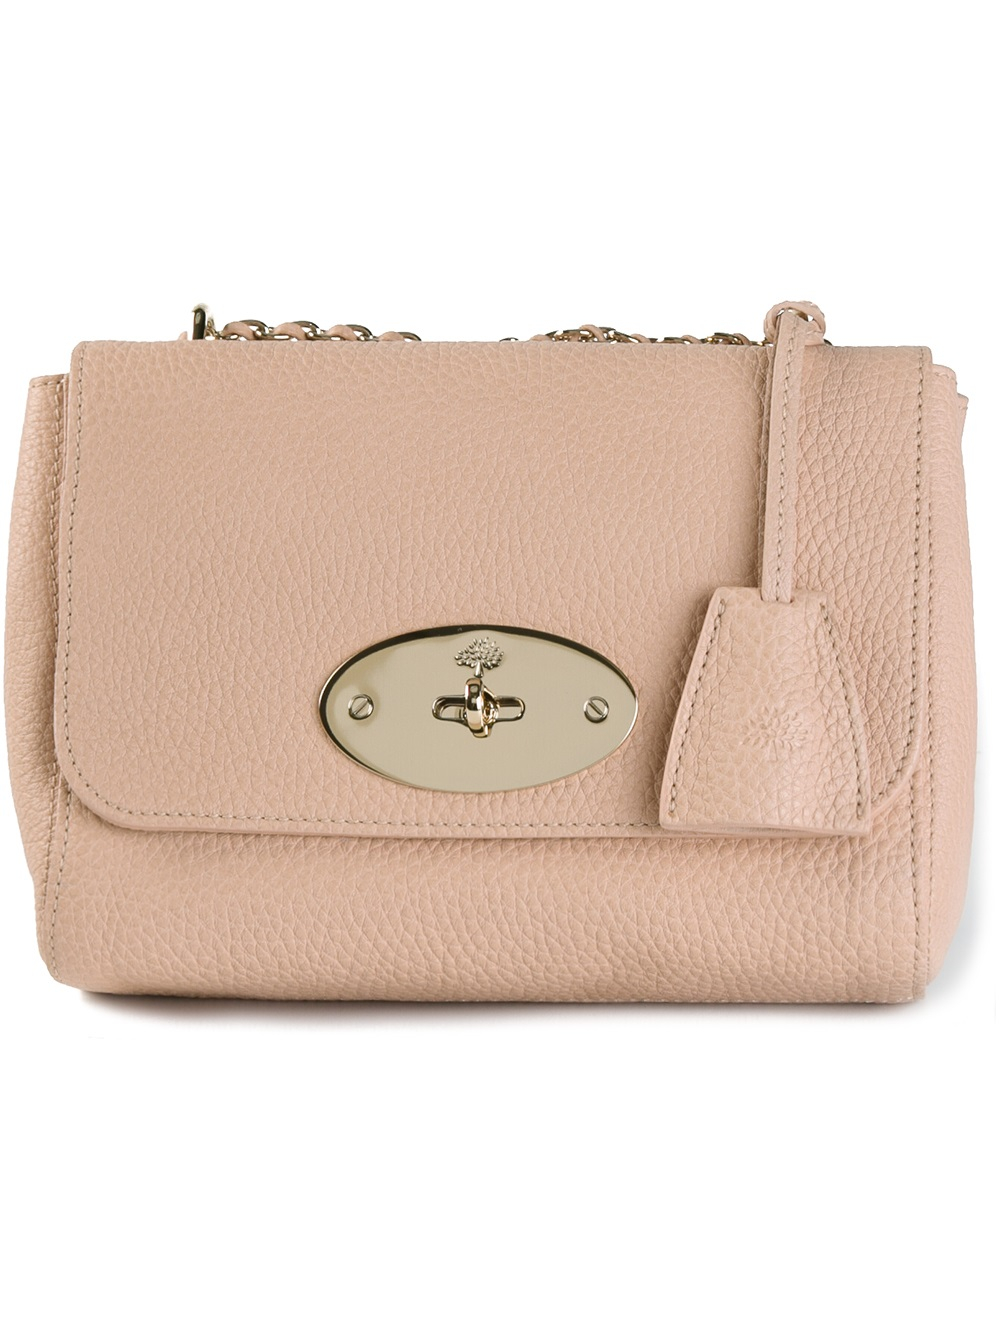 Lyst - Mulberry Lily Shoulder Bag in Pink